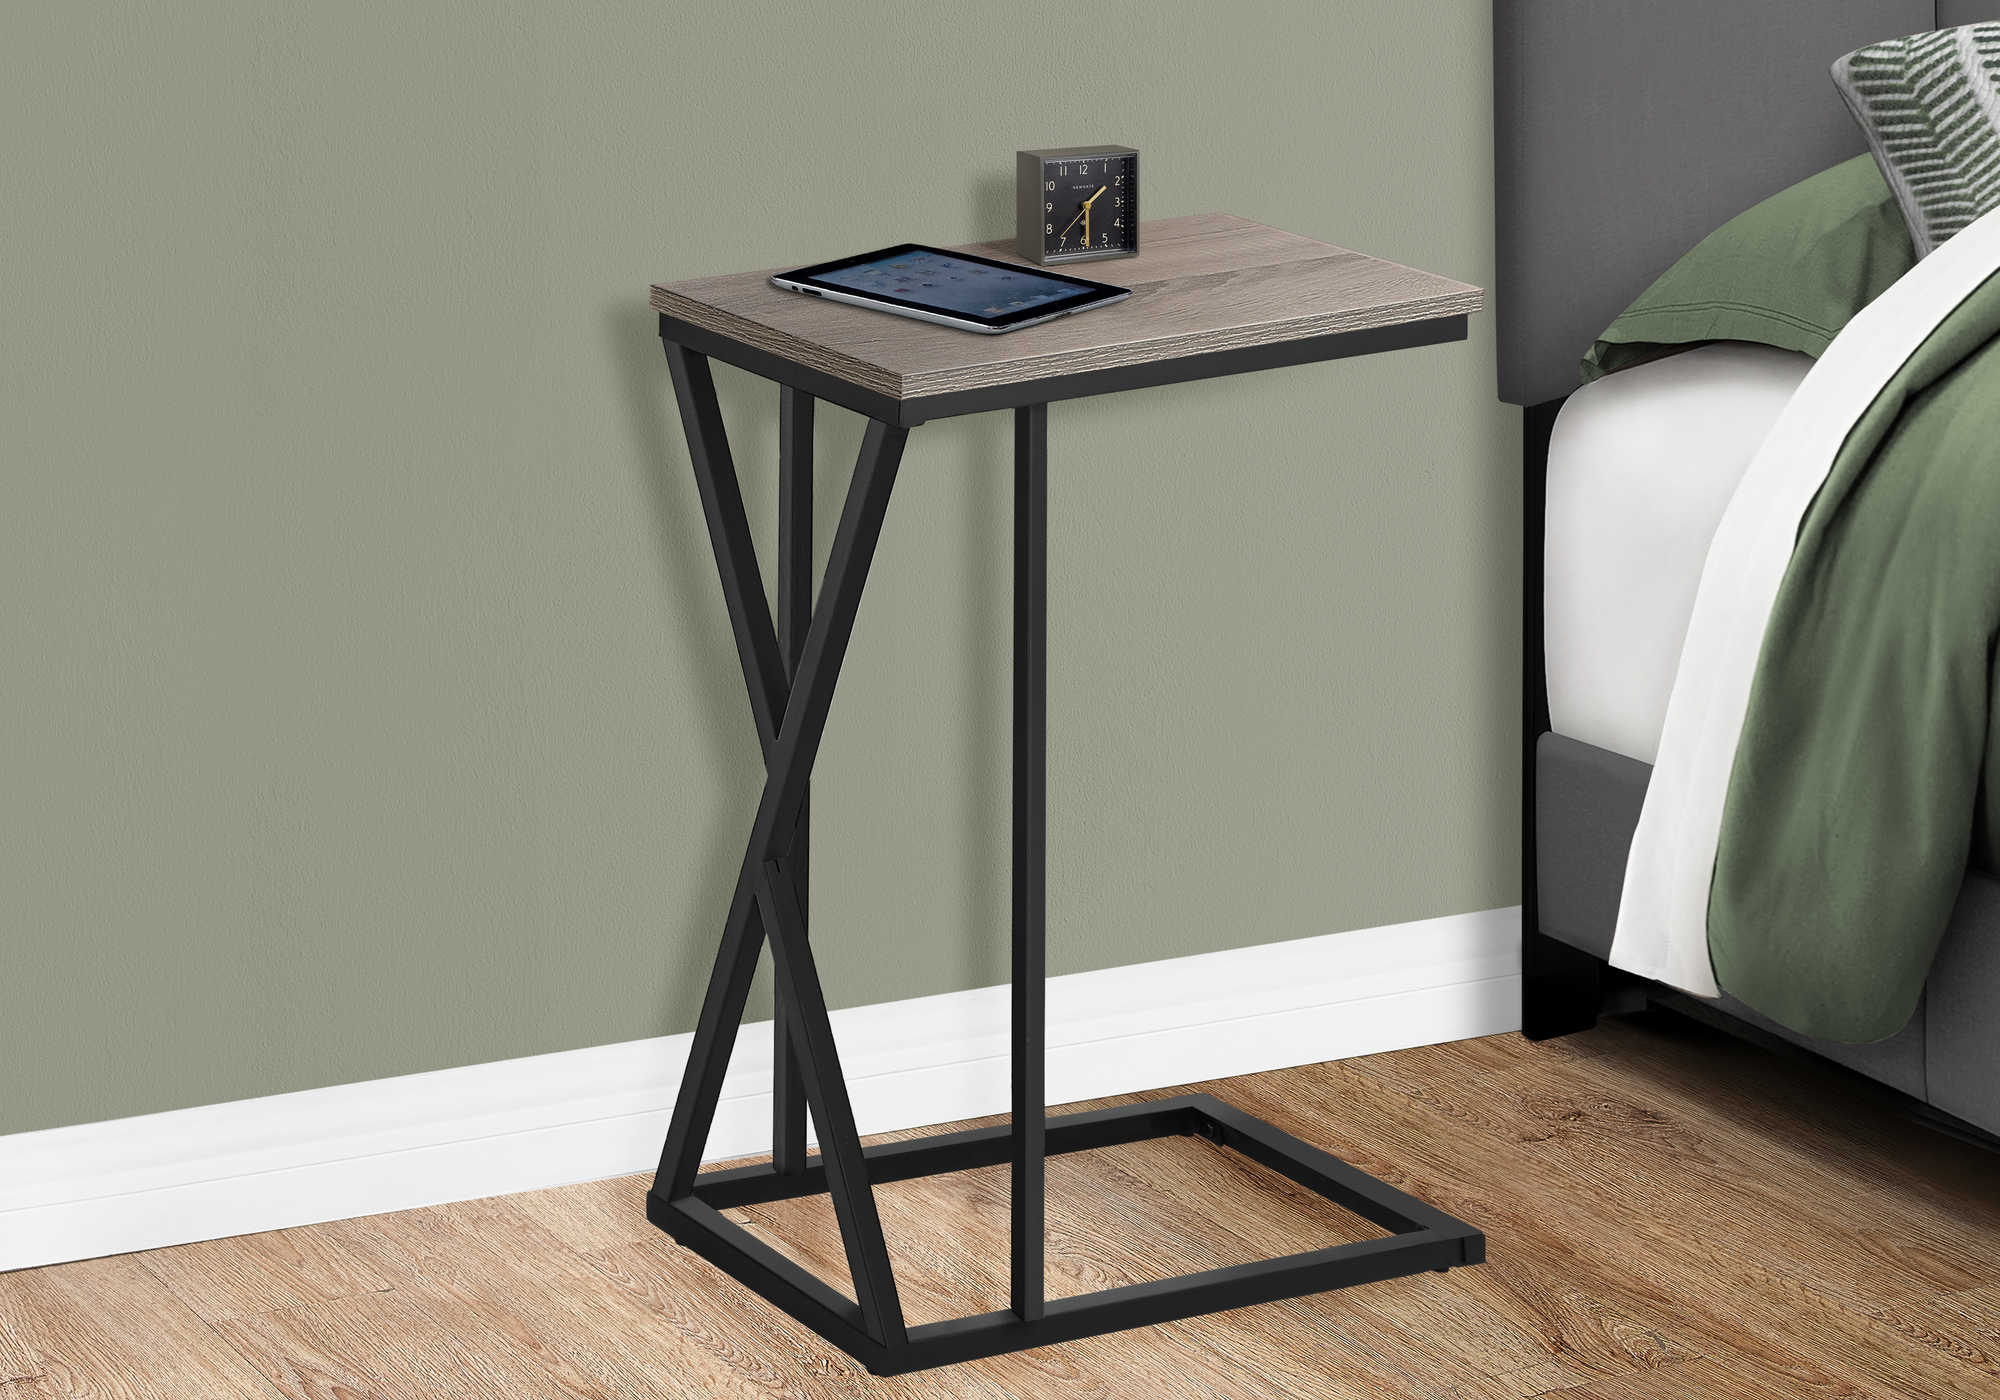 BEDROOM ACCENT TABLE - 25"H / DARK TAUPE / BLACK METAL